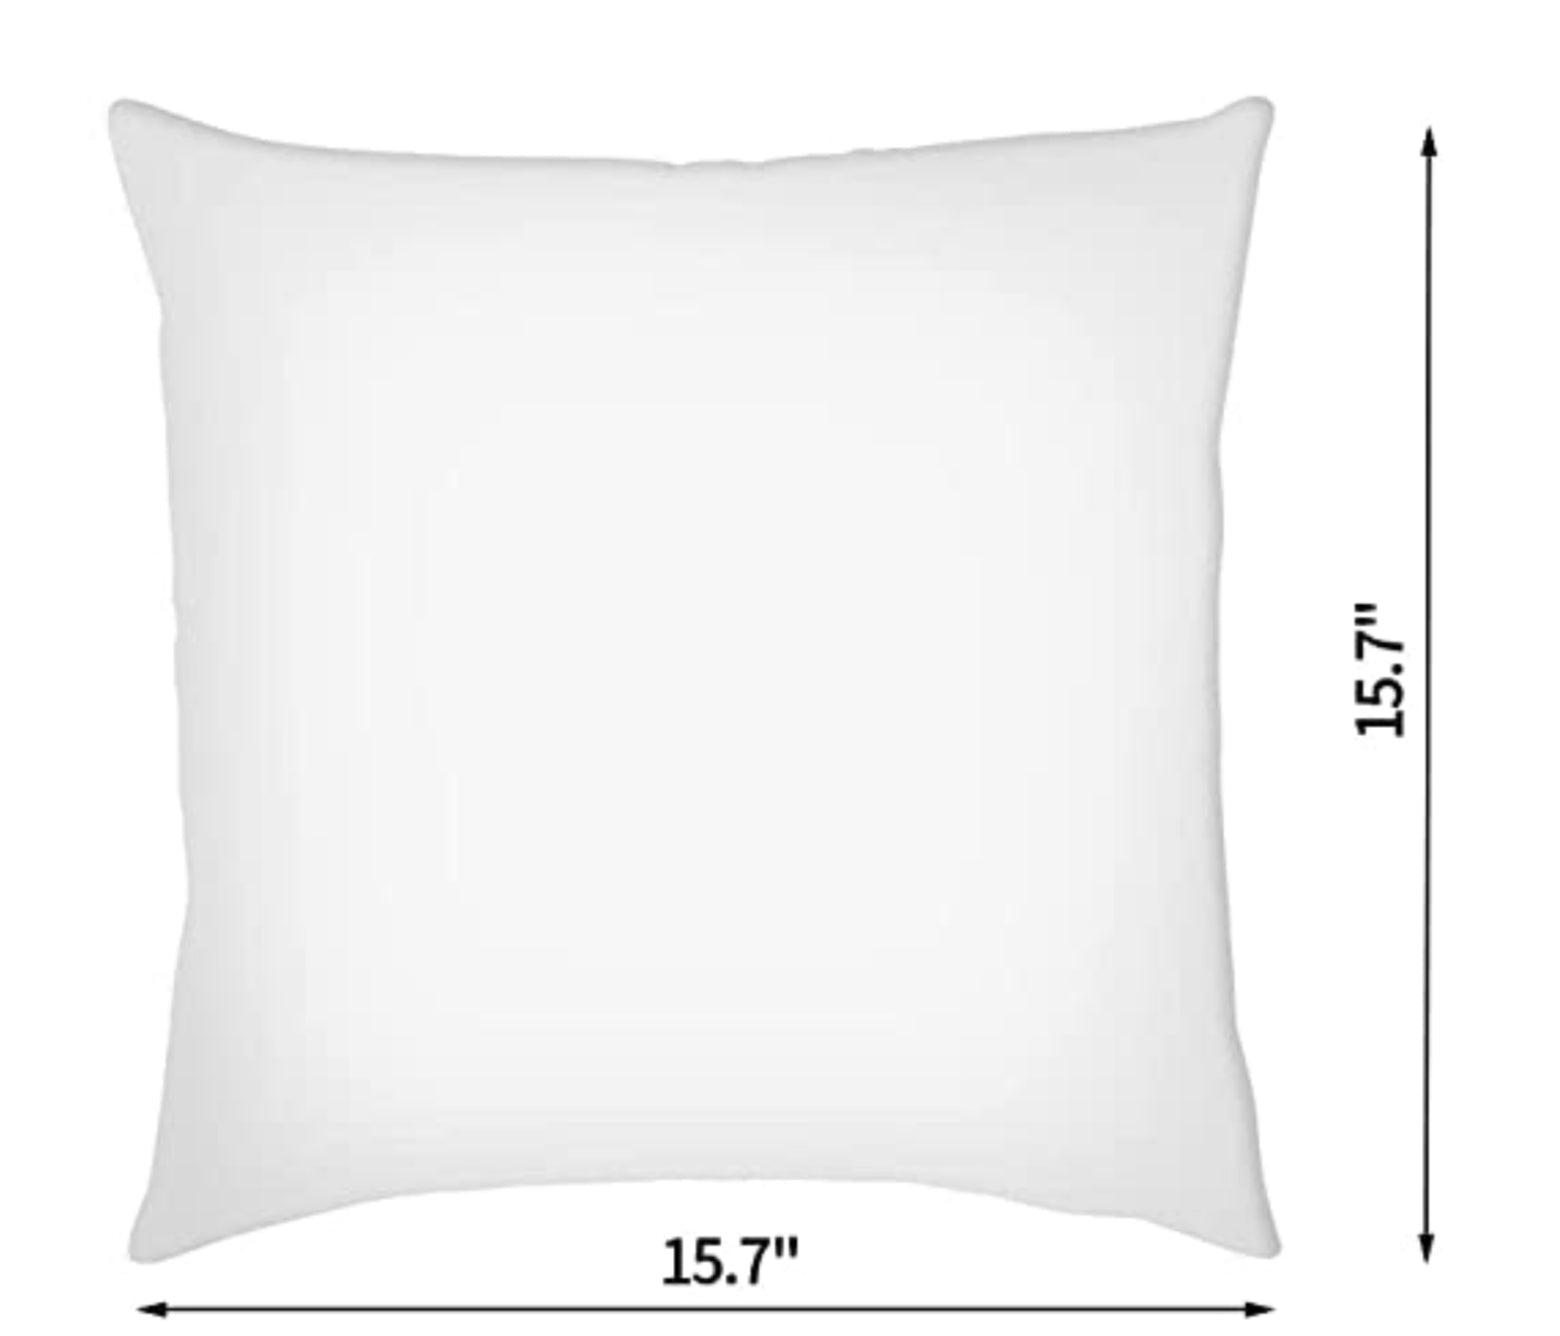 You & Me - Cushion Cover